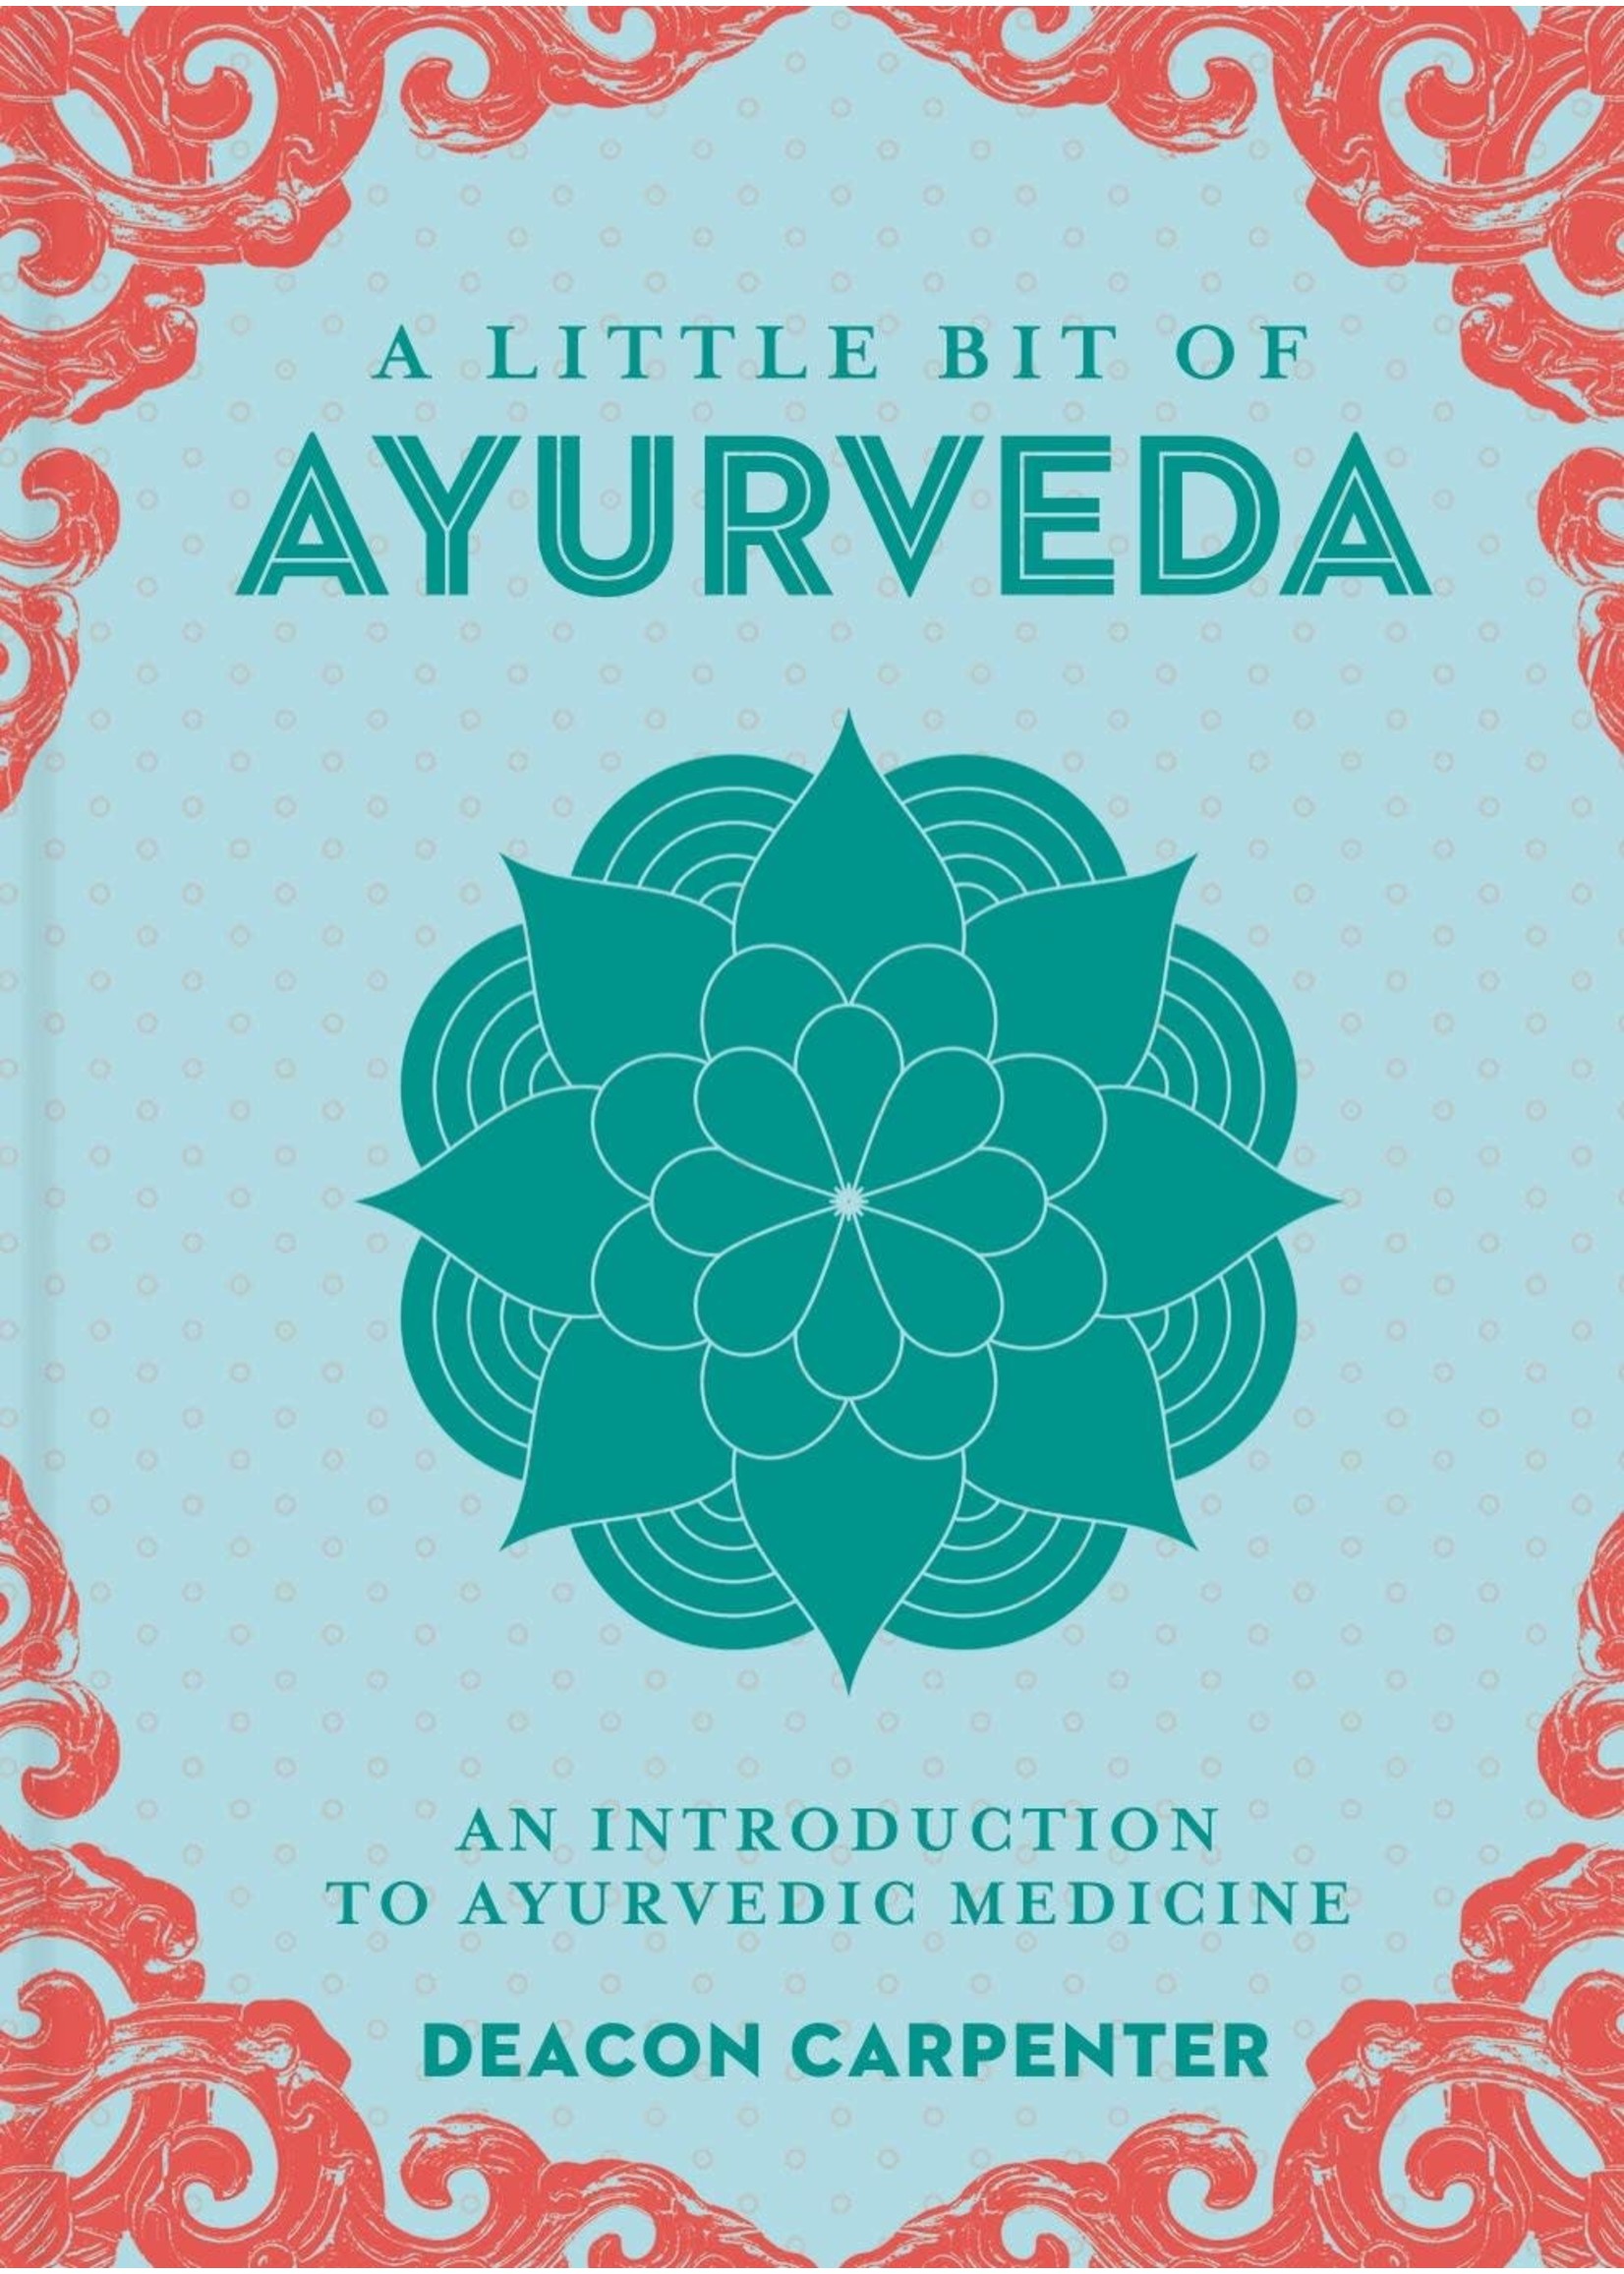 A Little Bit of Ayurveda - An Introdction to Ayurvedic Medicine